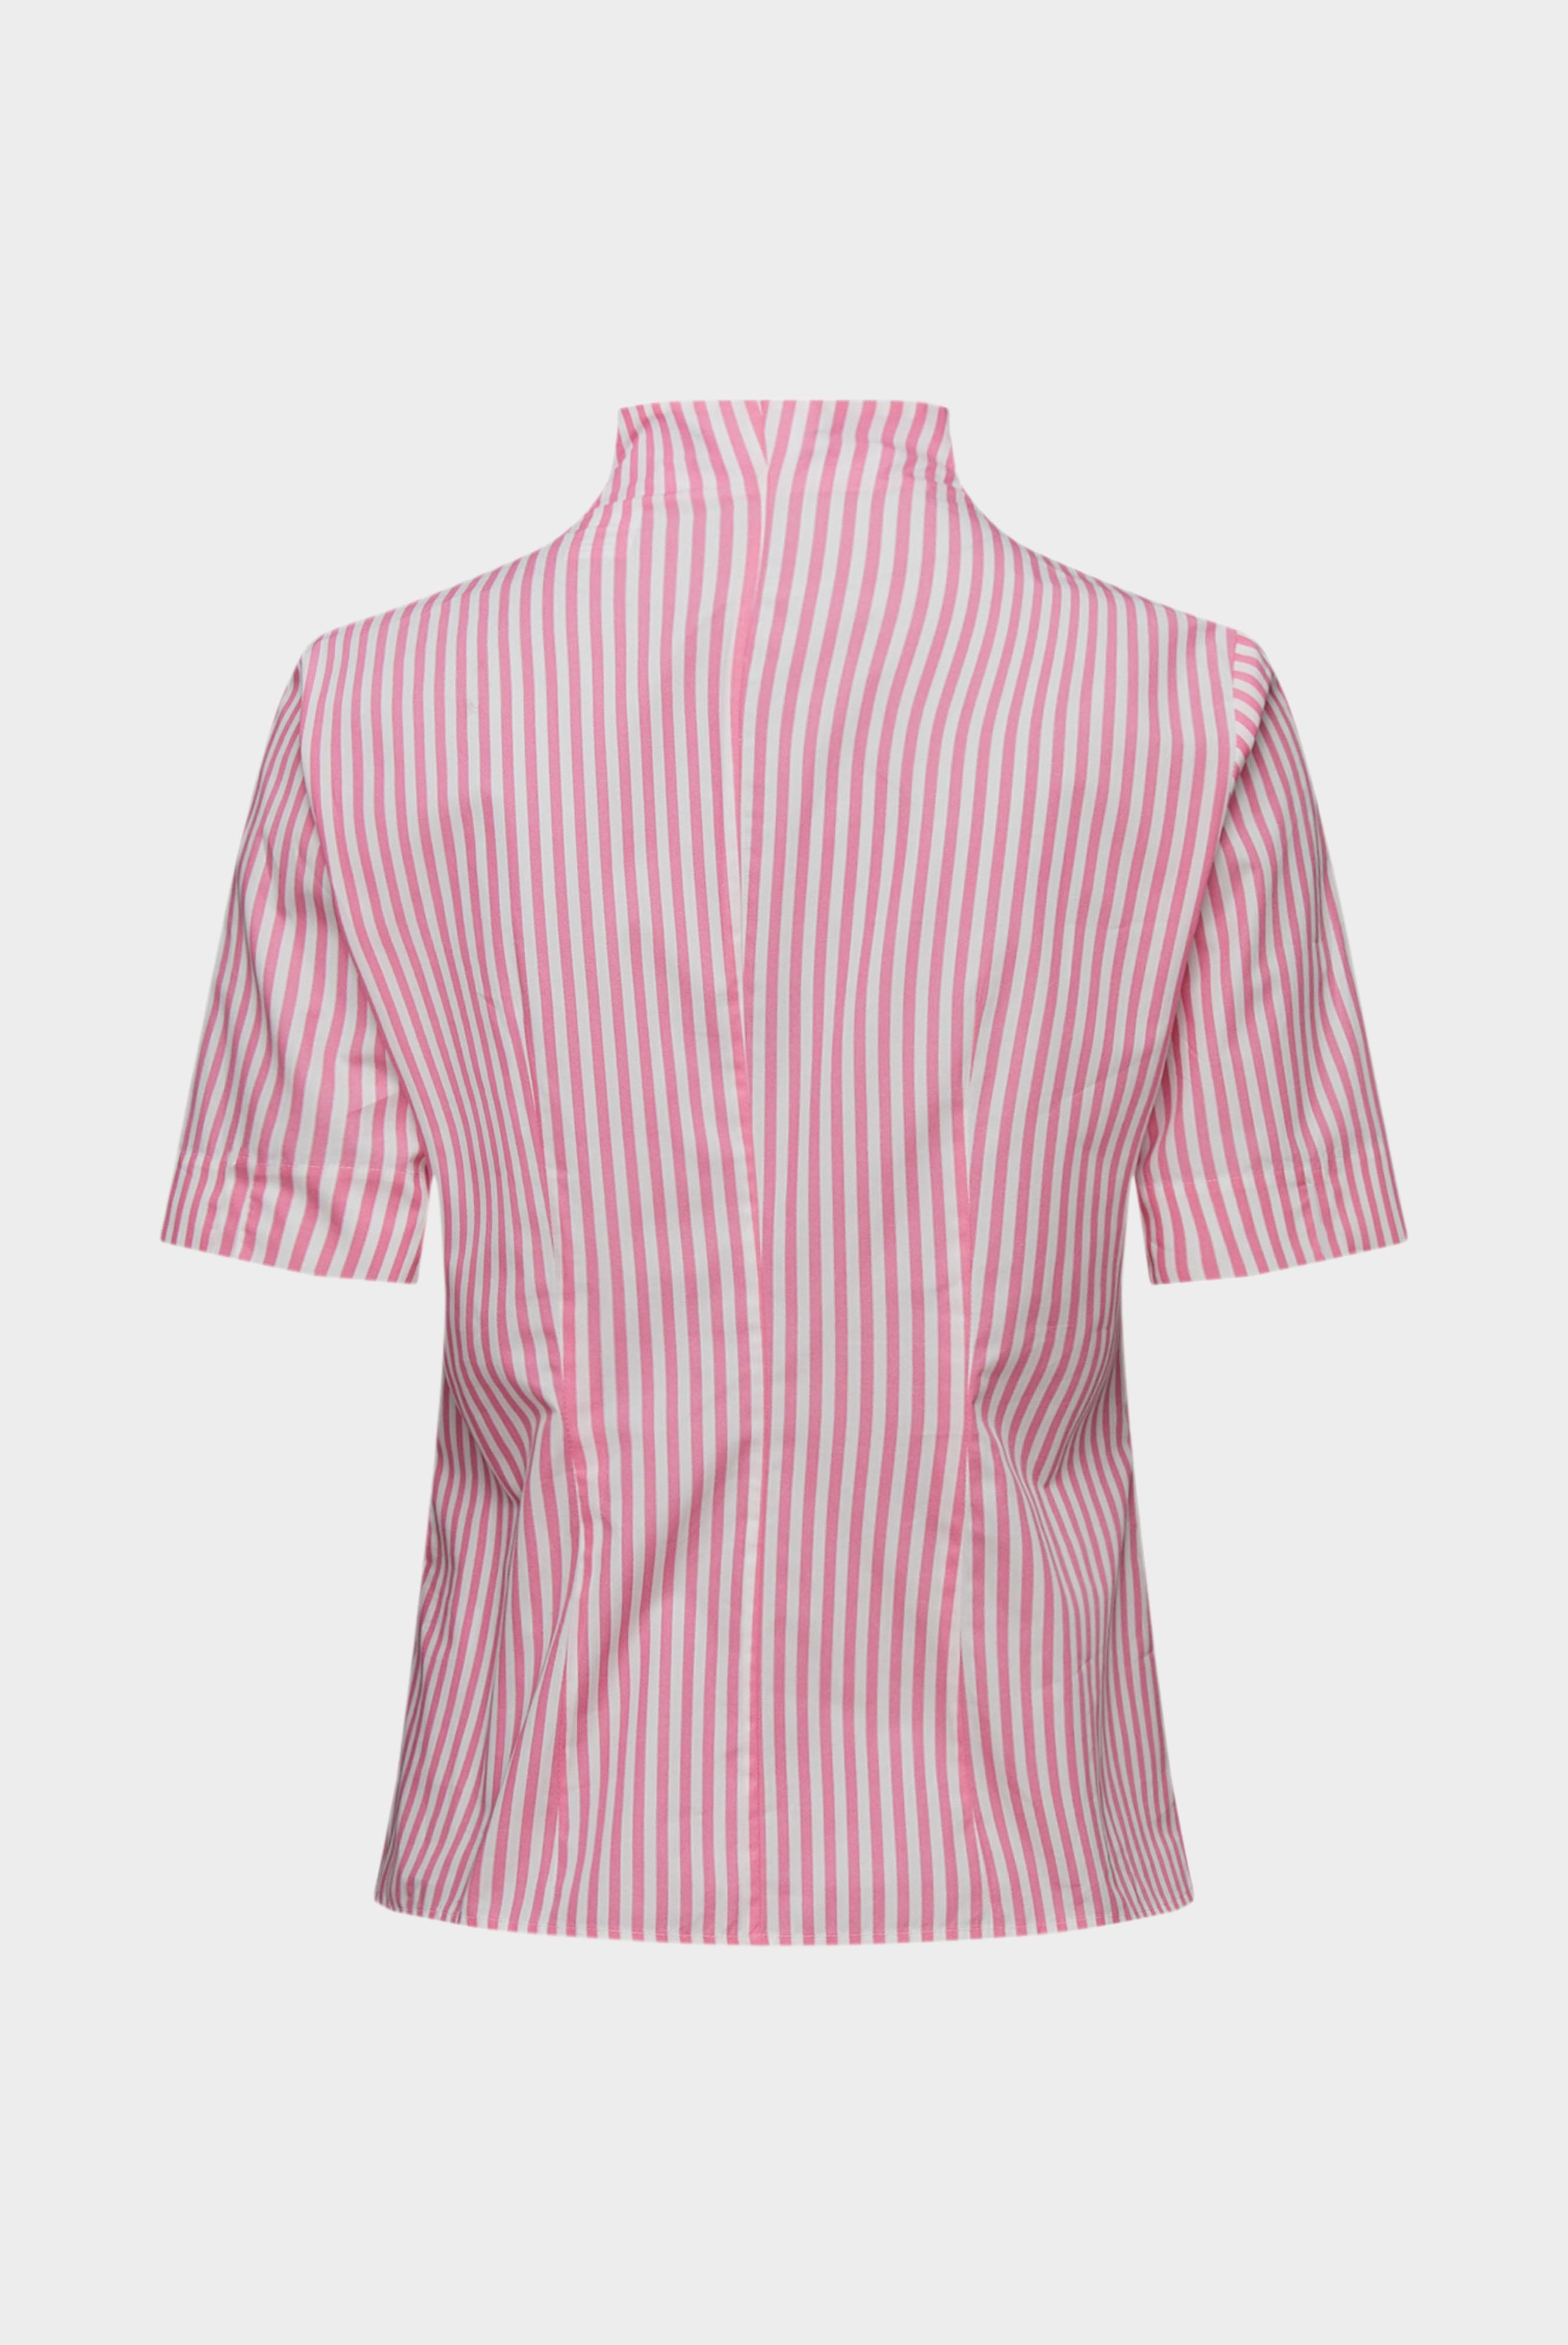 Business Blouses+Striped cup-collar blouse in cotton poplin+05.5814.FG.170275.530.38